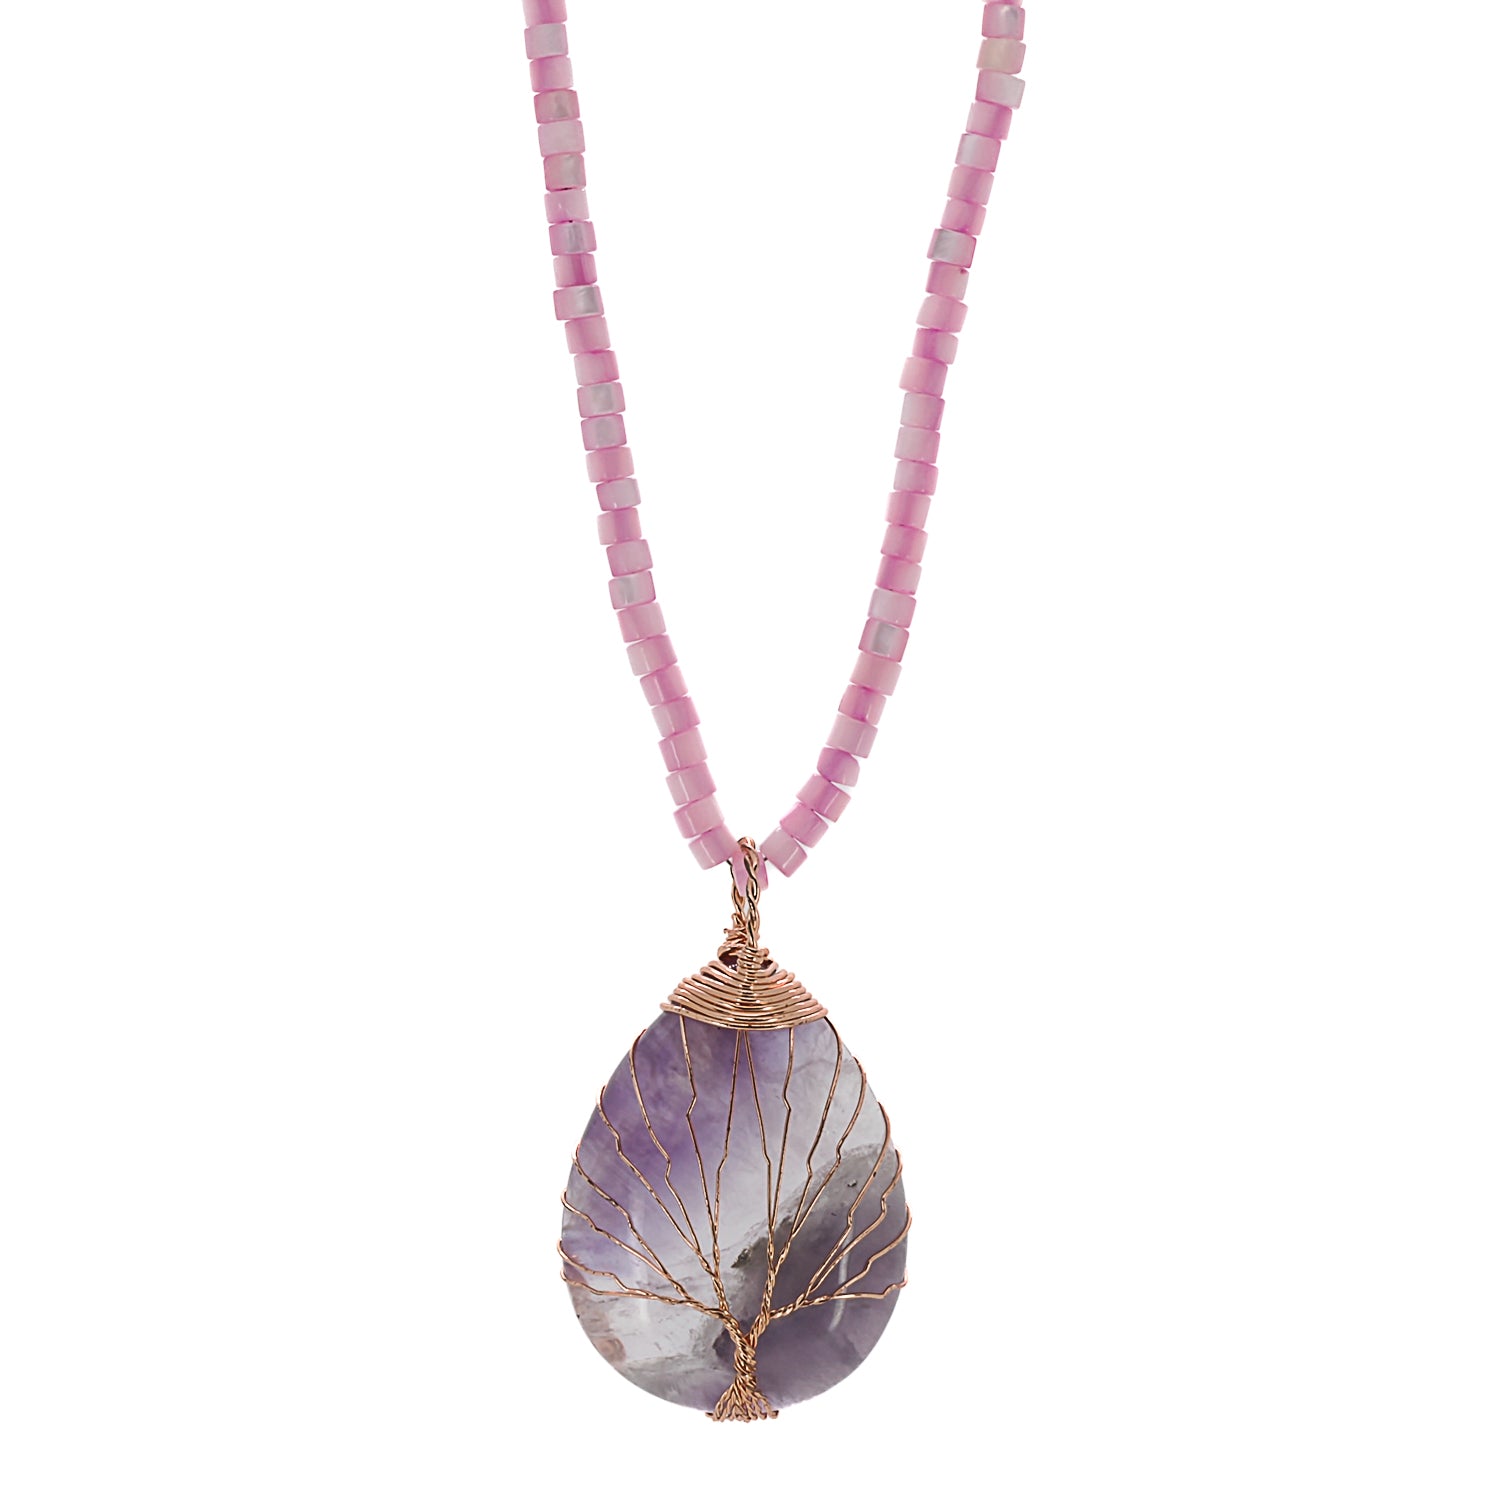 Adorn yourself with the elegance of the Amethyst Healing Tree Necklace, a handmade accessory with a pink pearl chain and a captivating amethyst tree pendant.